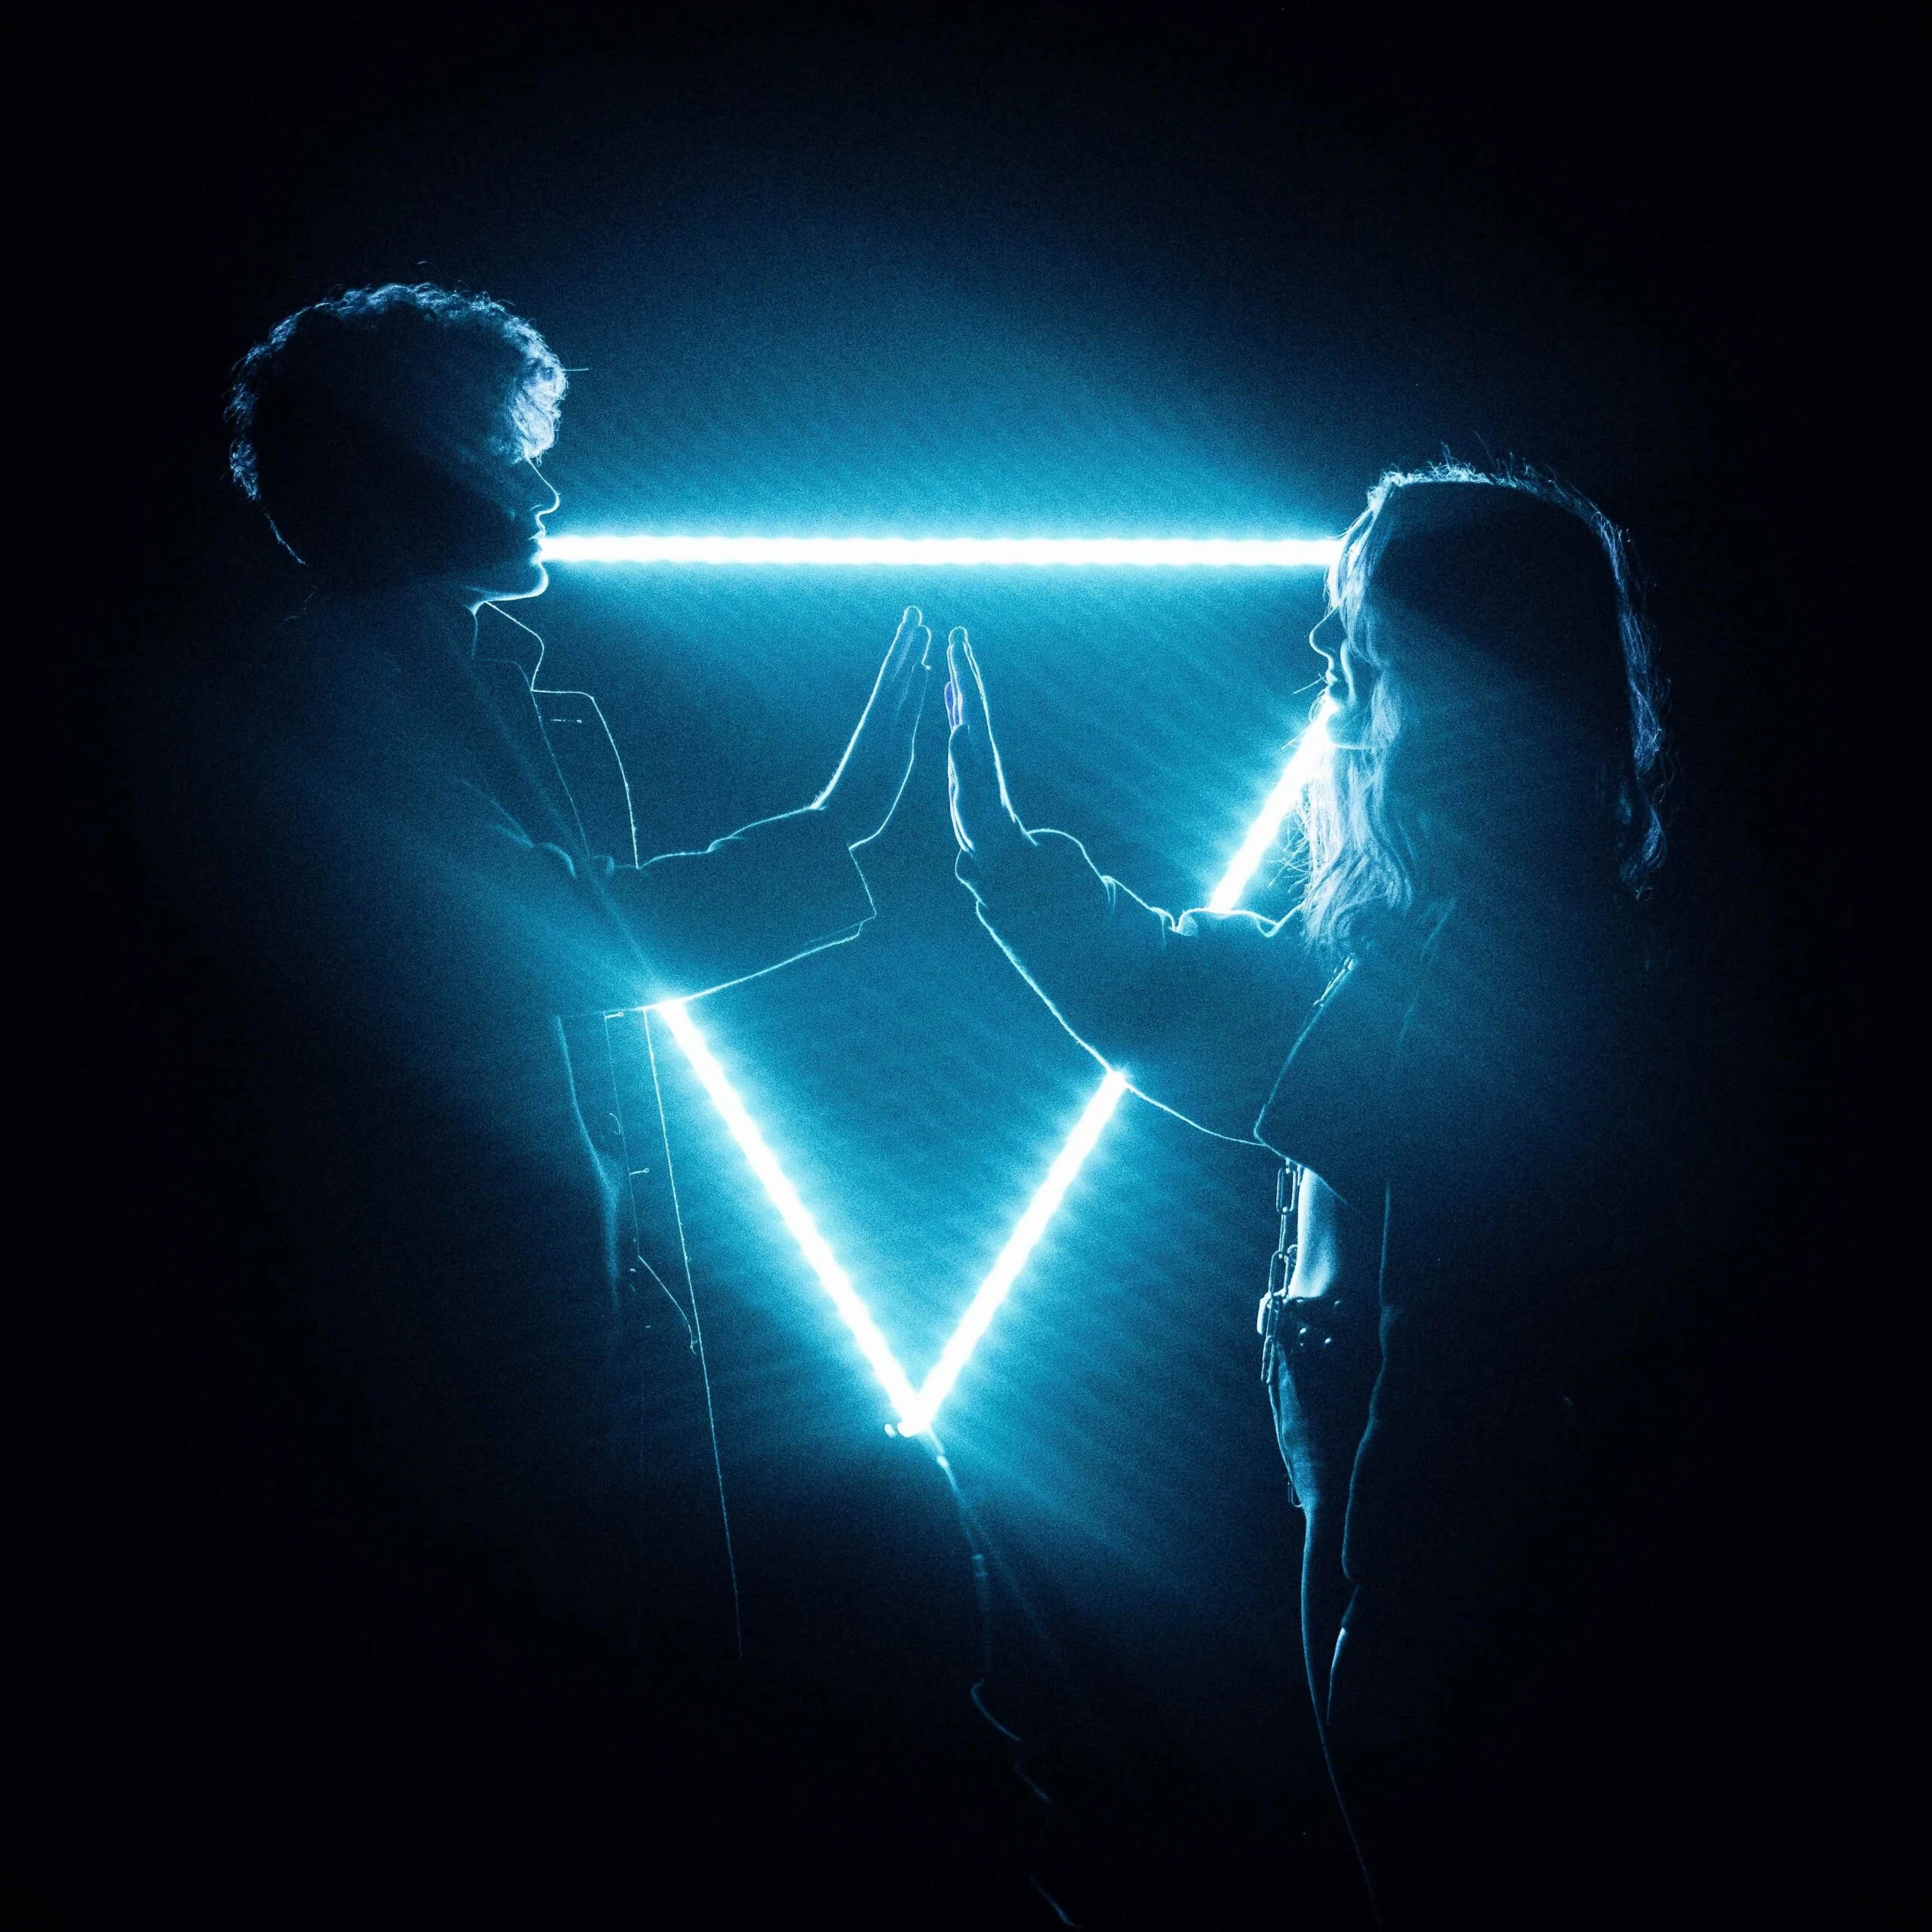 2 people facing each other with one of their hands up, about to touch the other persons hand. Upside-down triangle light in the background